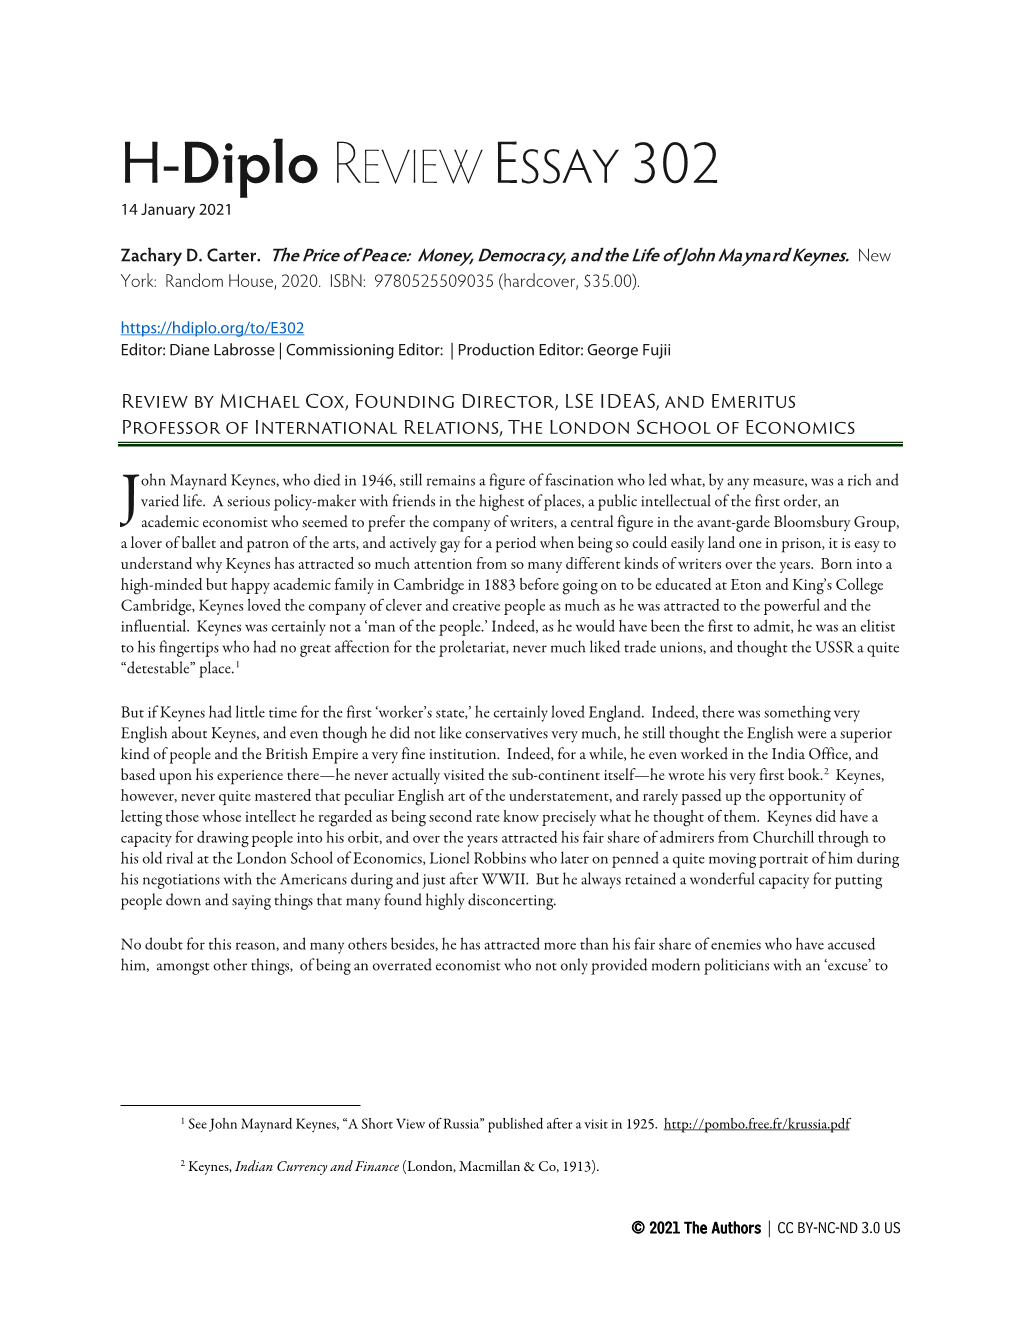 H-Diplo REVIEW ESSAY 302 14 January 2021